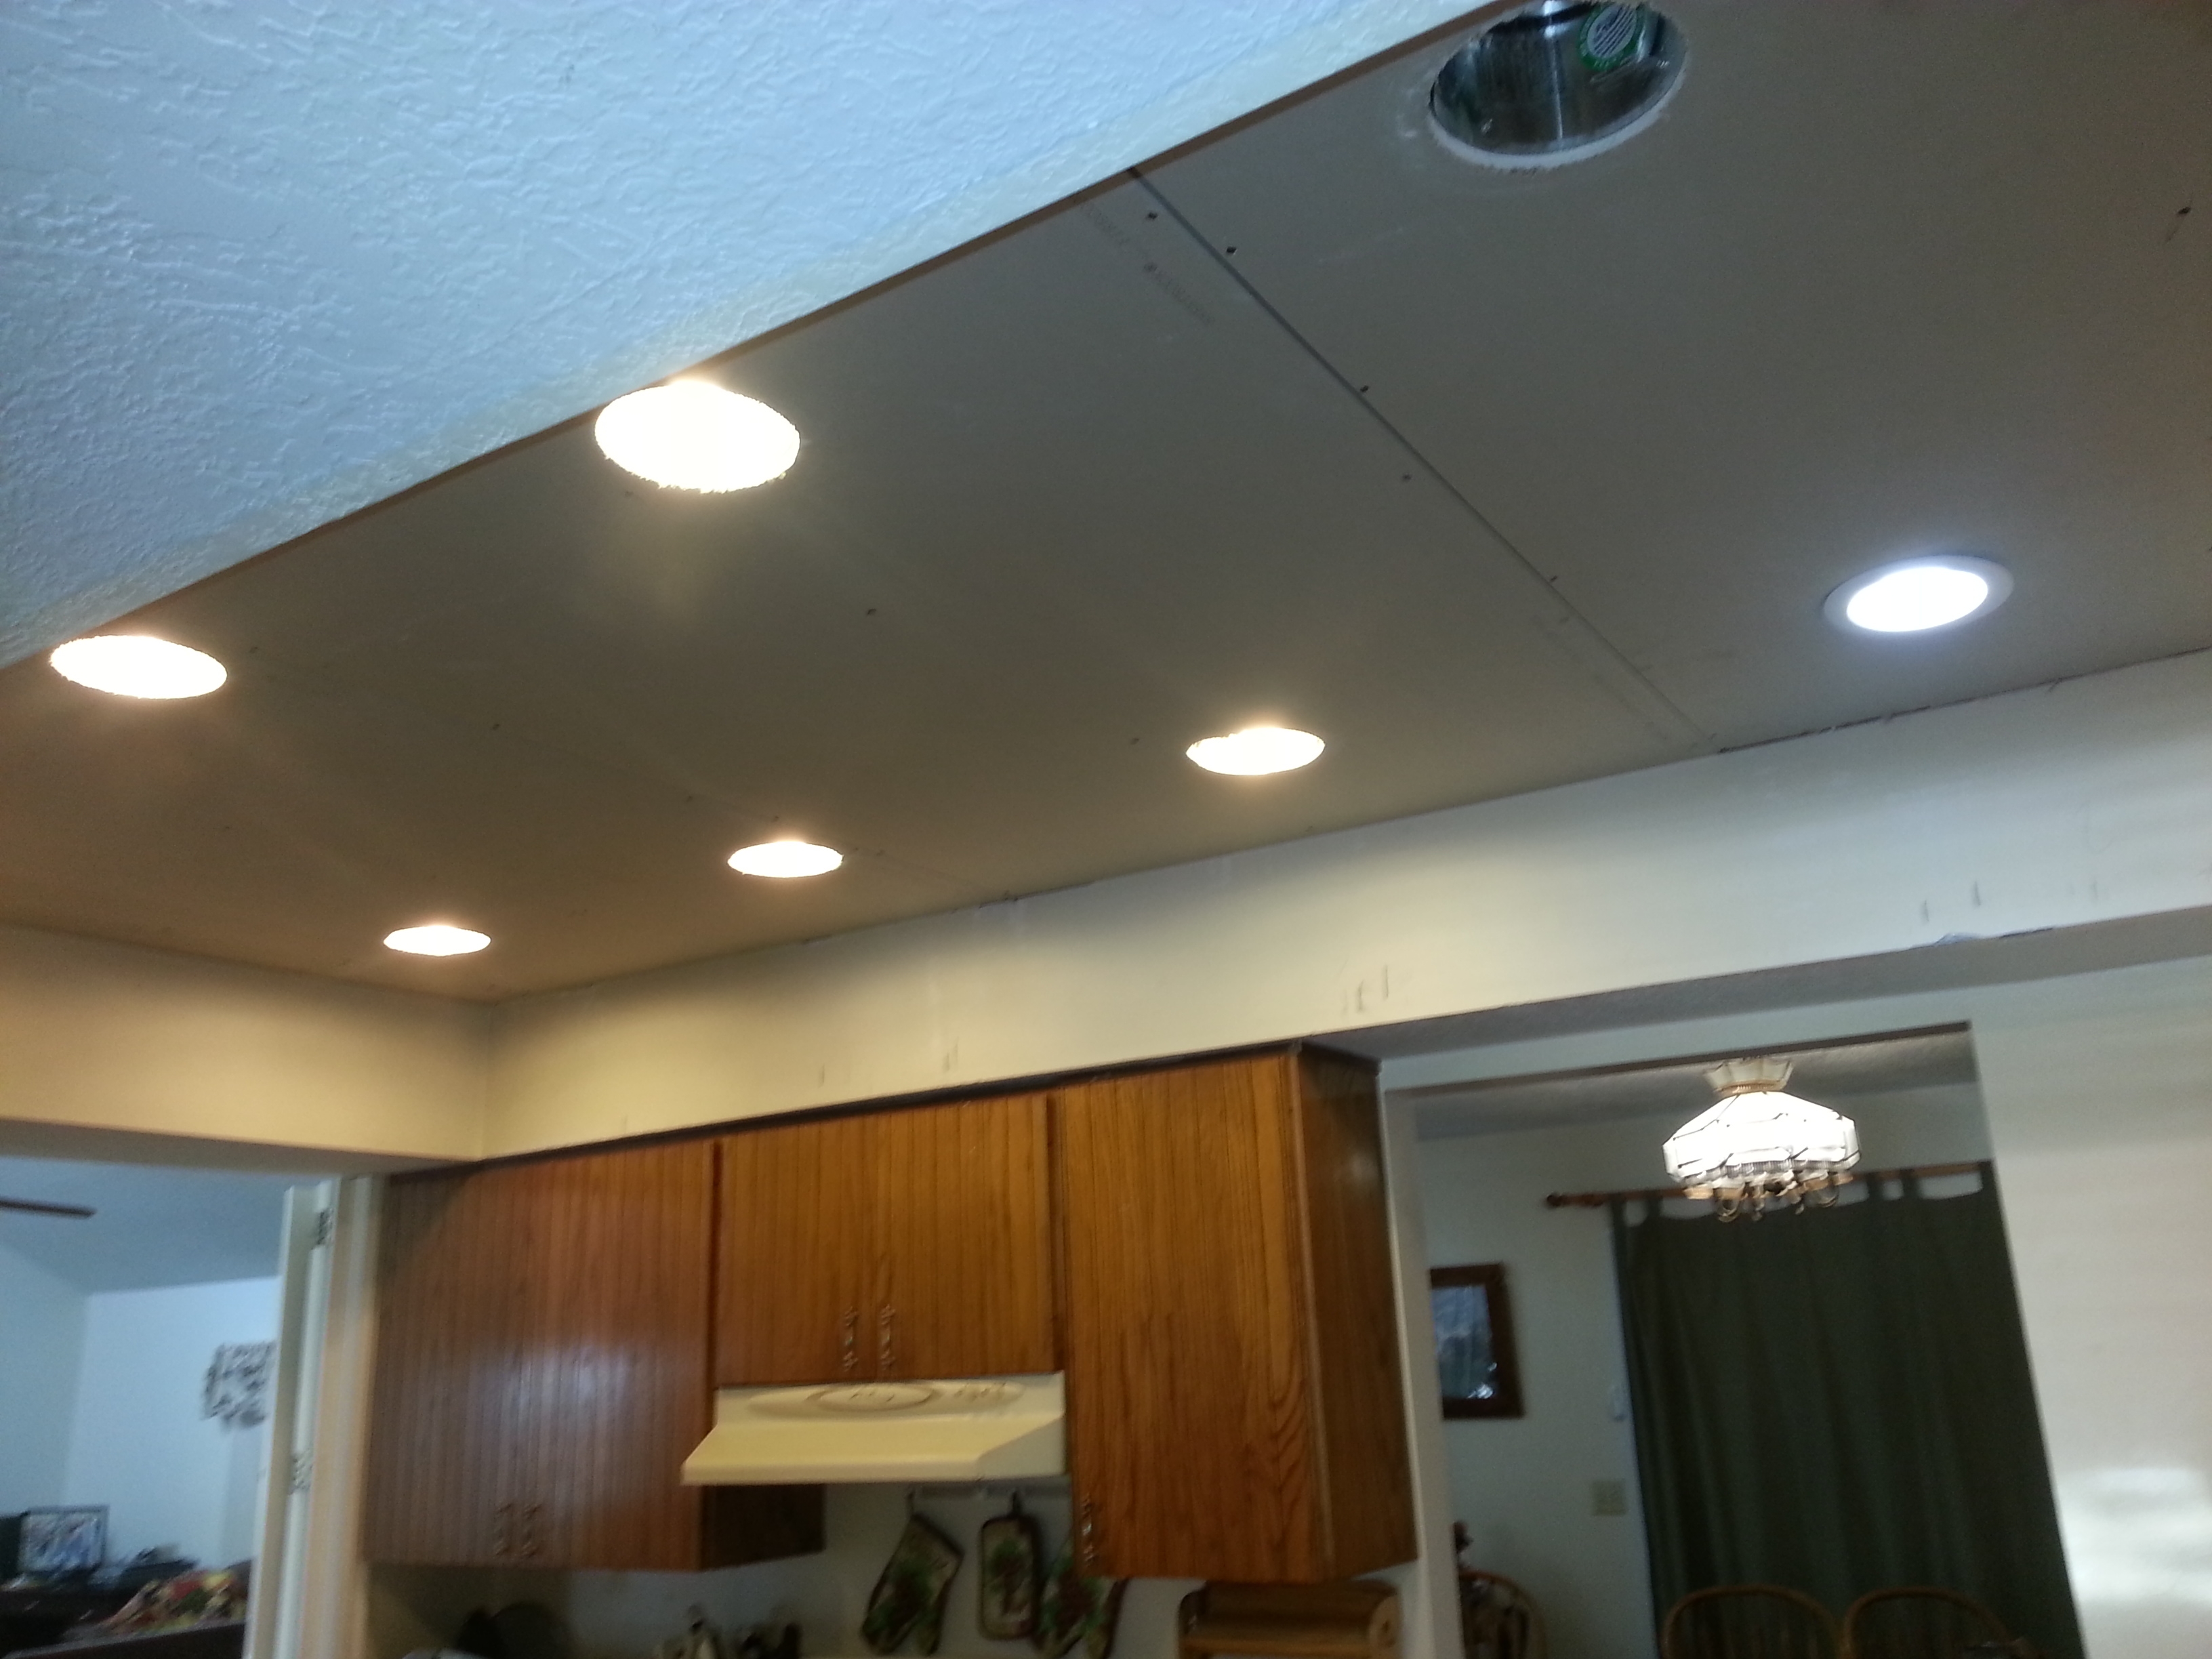 Led Recessed Lighting For Drop Ceilings3264 X 2448